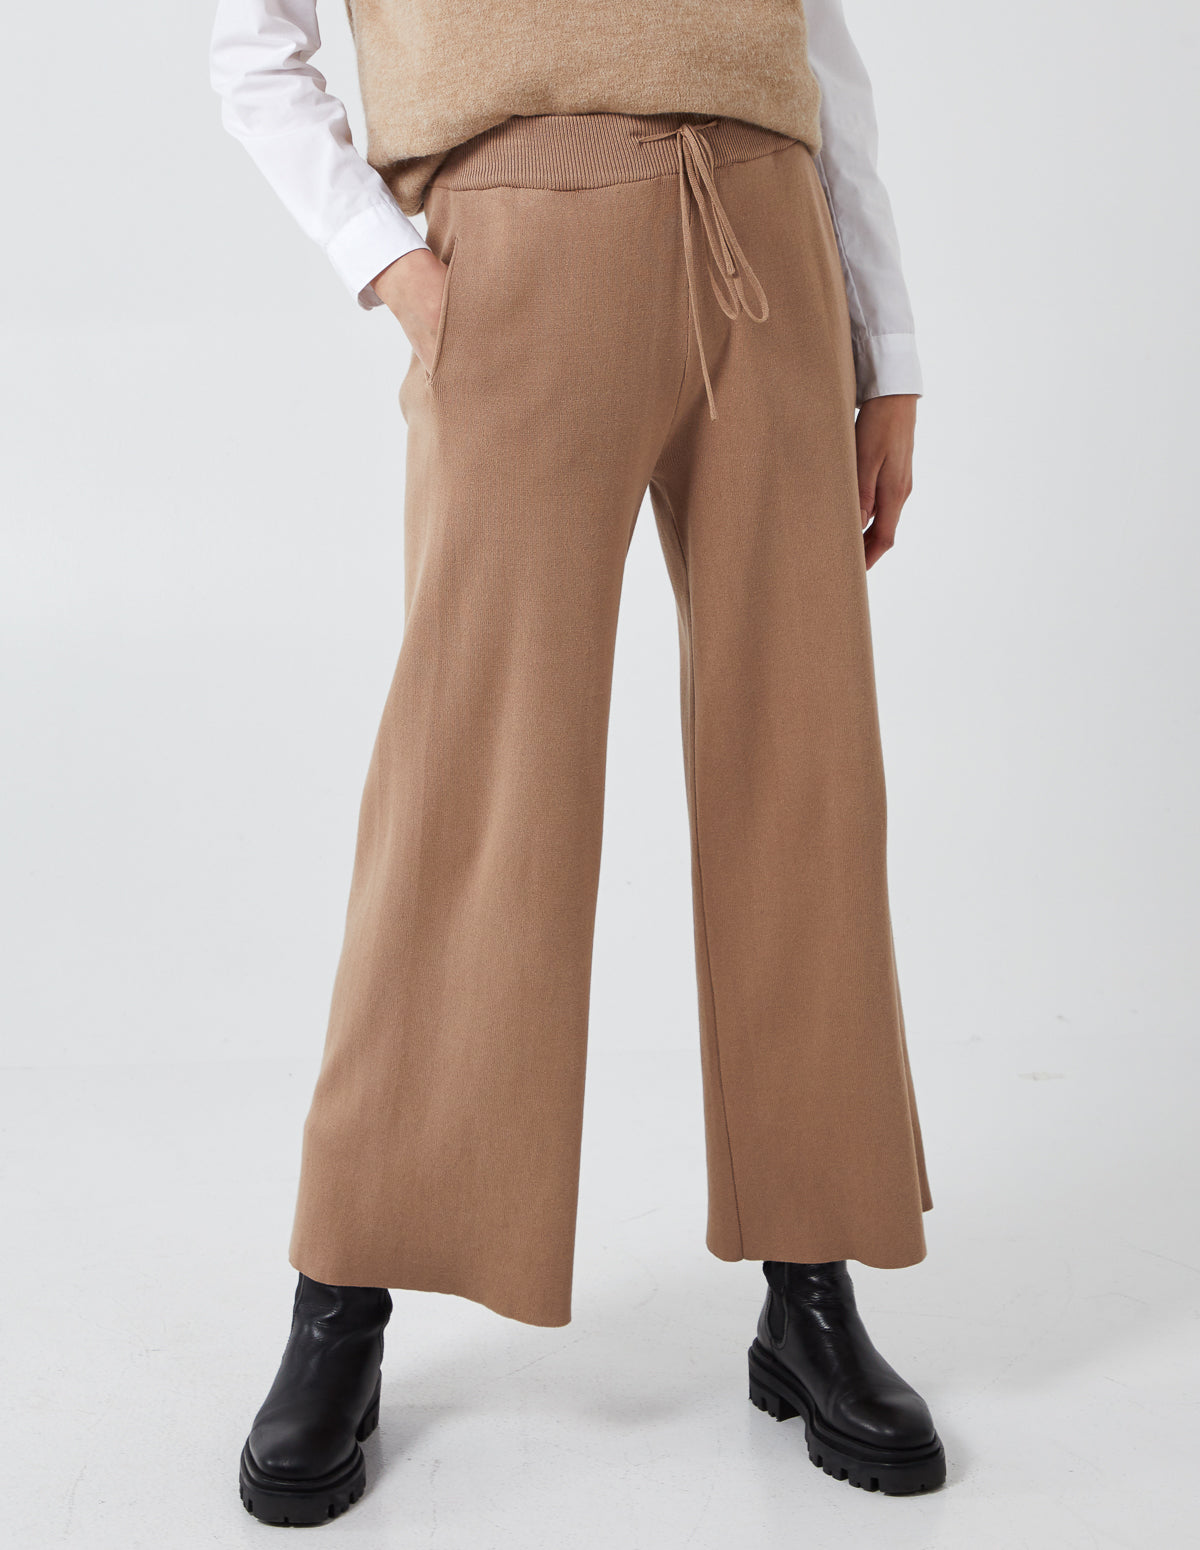 CHANTELLE - Knitted Drawstring Culottes - M